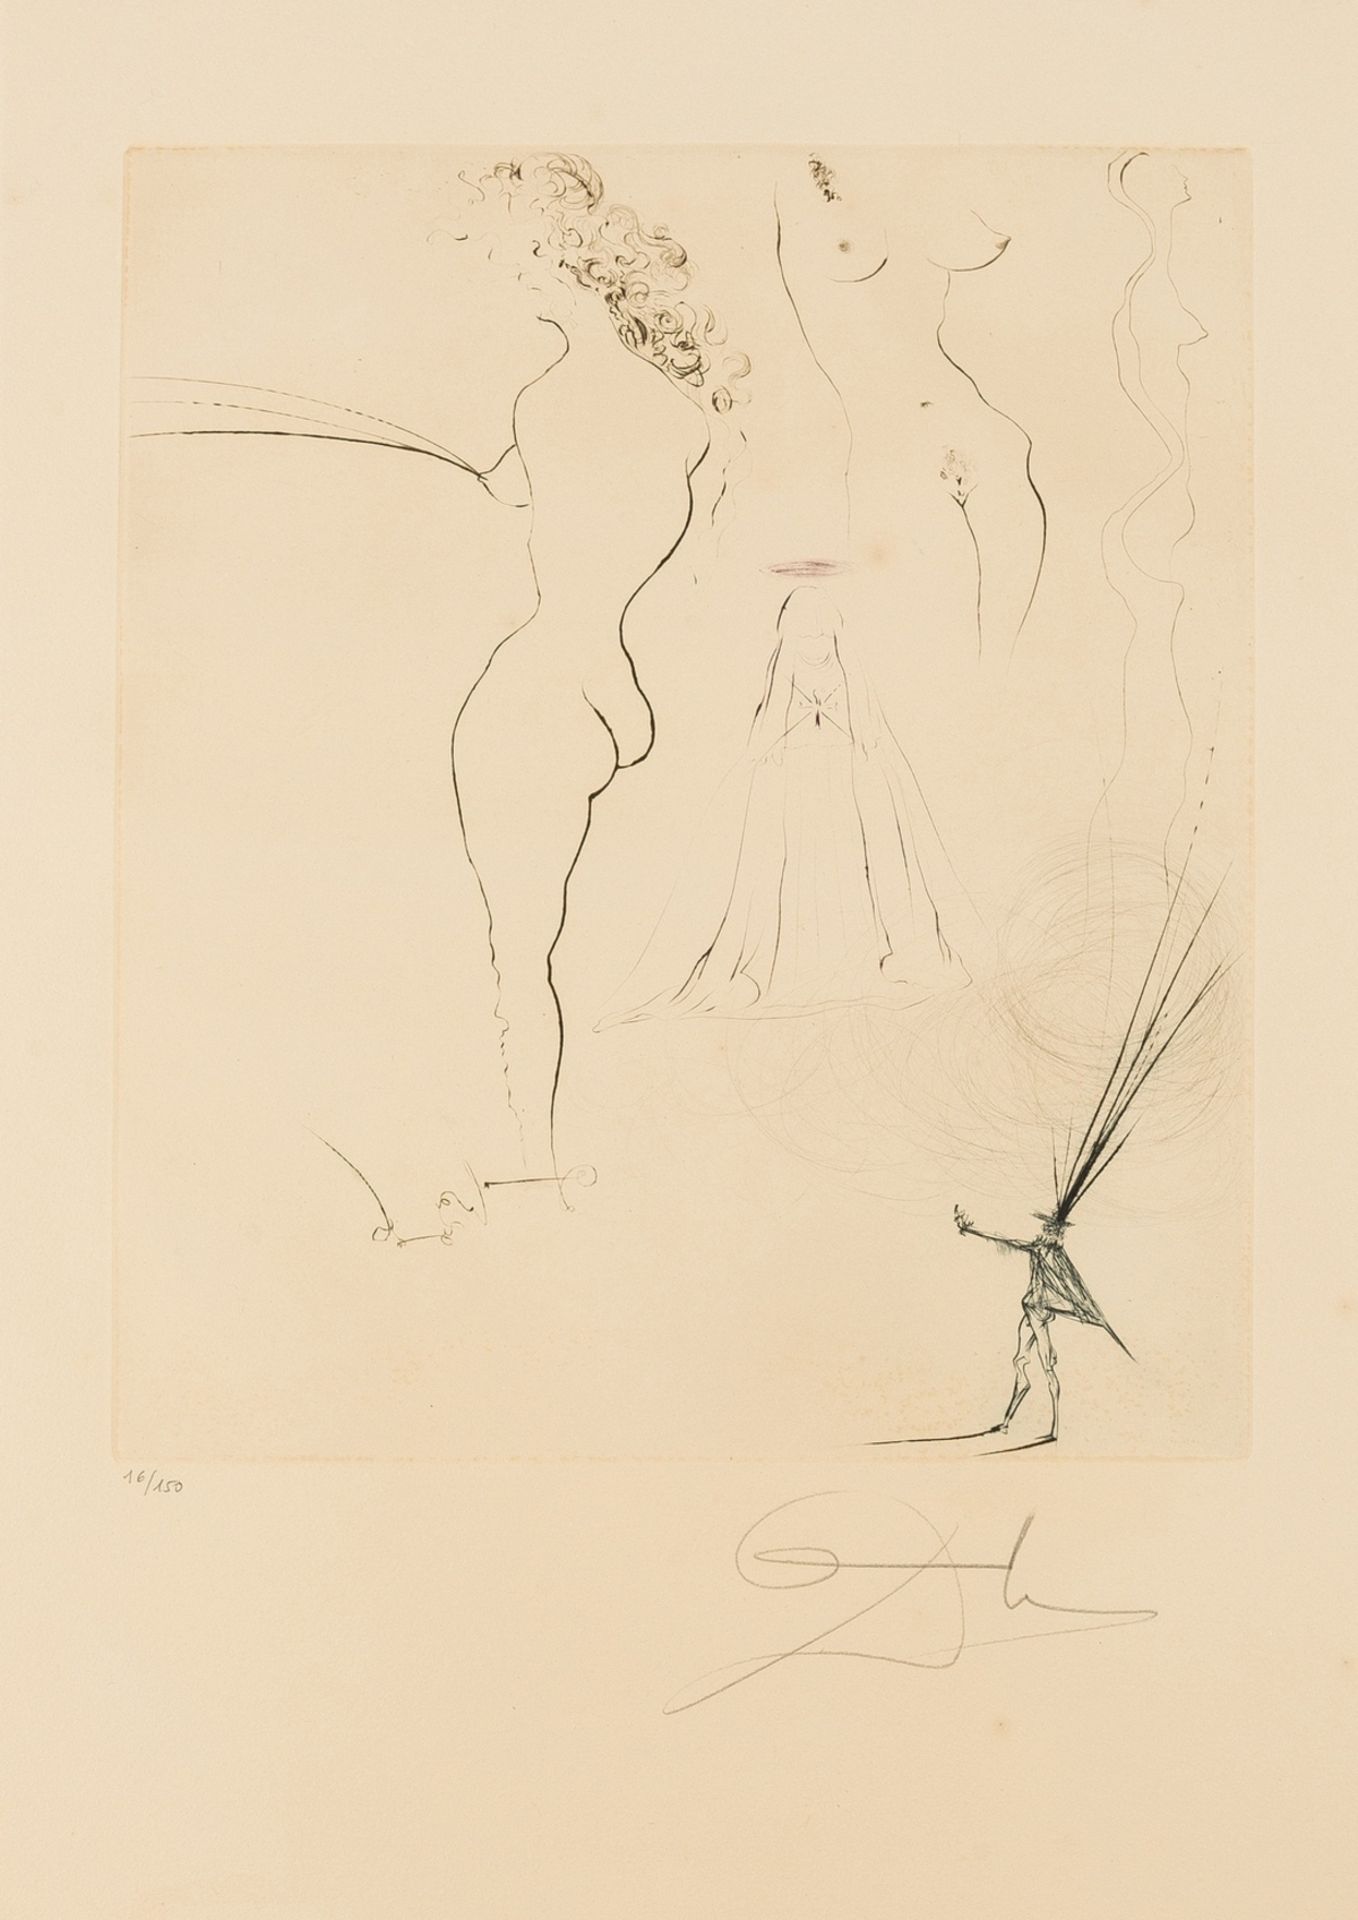 Salvador Dalí (1904-1989) Fontaine fantastique, from Aranella (Field 74-16 B; see M&L 721a)